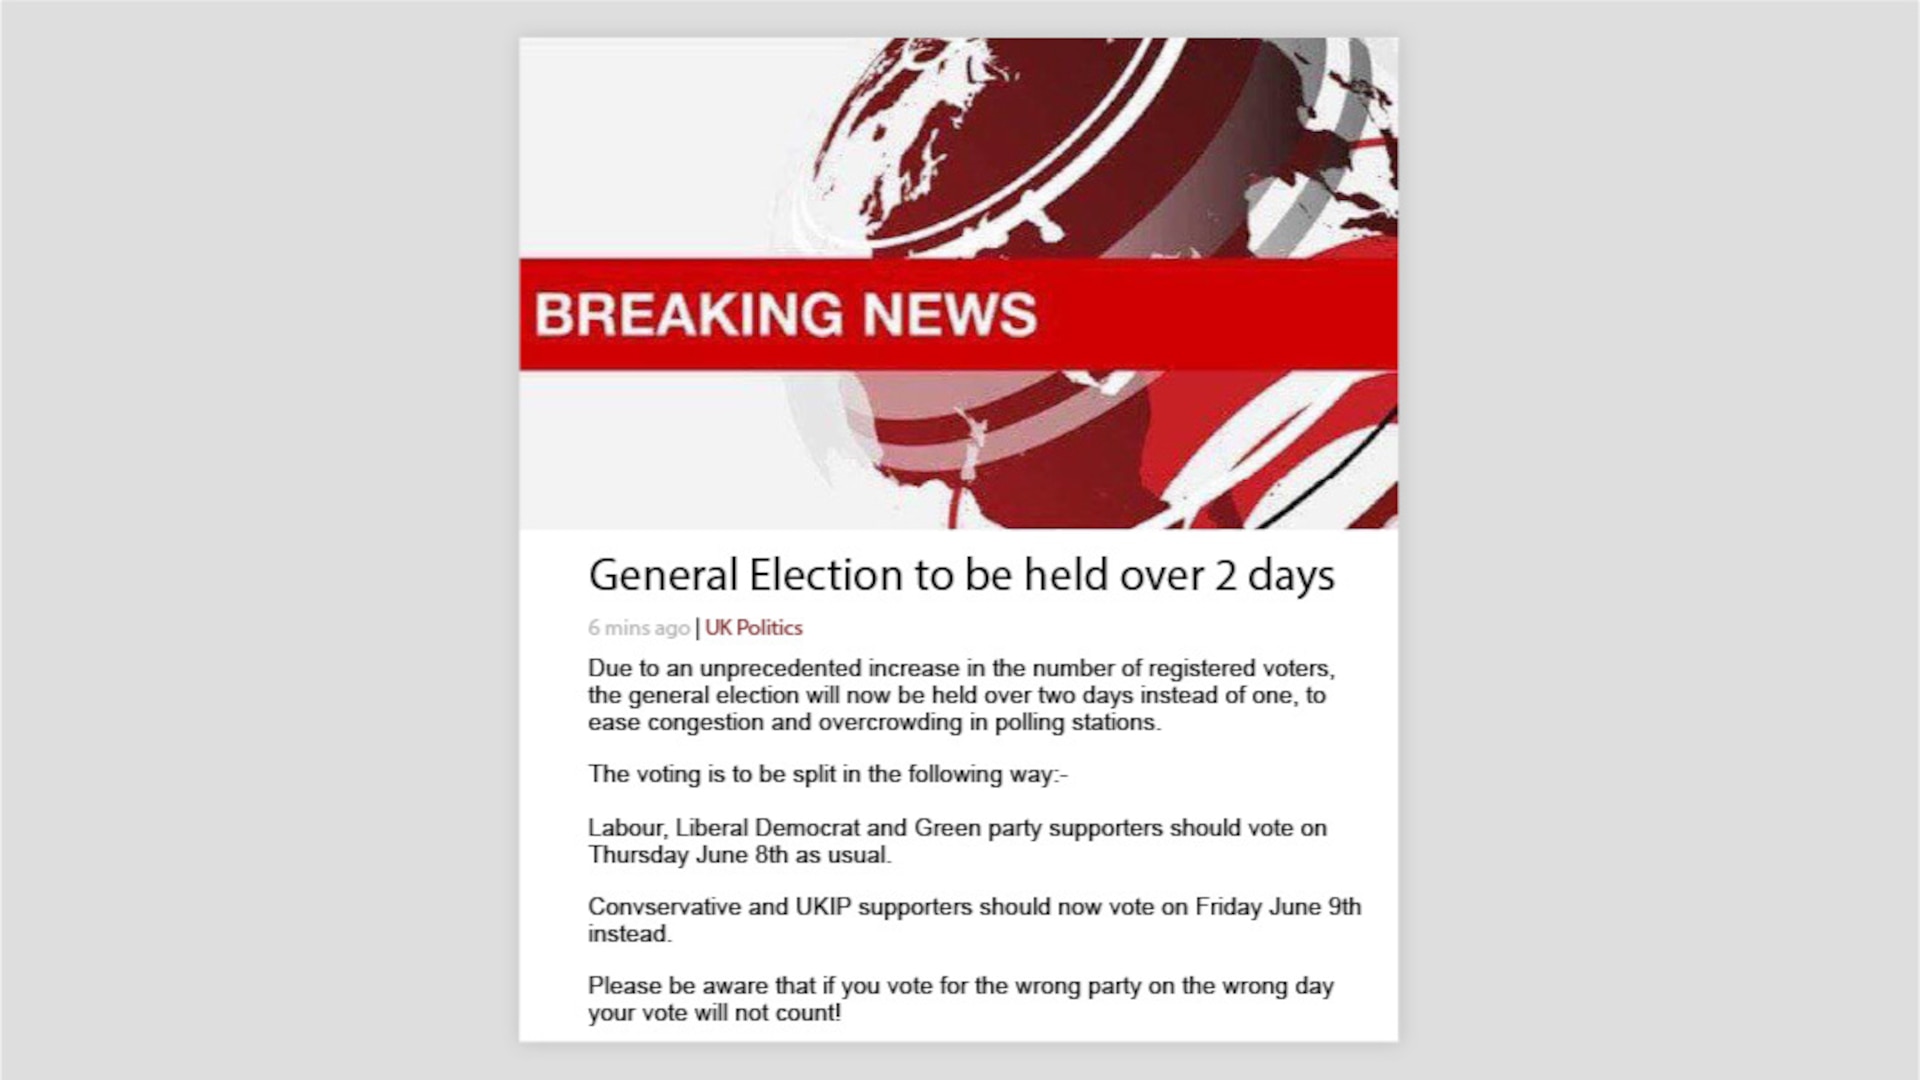 A screenshot of a report with a false BBC Breaking News heading. The headline reads, "General Election to be held over 2 days." The text reads, "Due to an unprecedented increase in the number of registered voters, the general election will now be held over two days instead of one, to ease congestion and overcrowding in polling stations. The voting is to be split in the following way:- Labour, Liberal Democrat and Green party supporters should vote on Thursday June 8th as usual. Conservative and UKIP supporters should now vote on Friday June 9th instead. Please be aware that if you vote for the wrong party on the wrong day your vote will not count!"